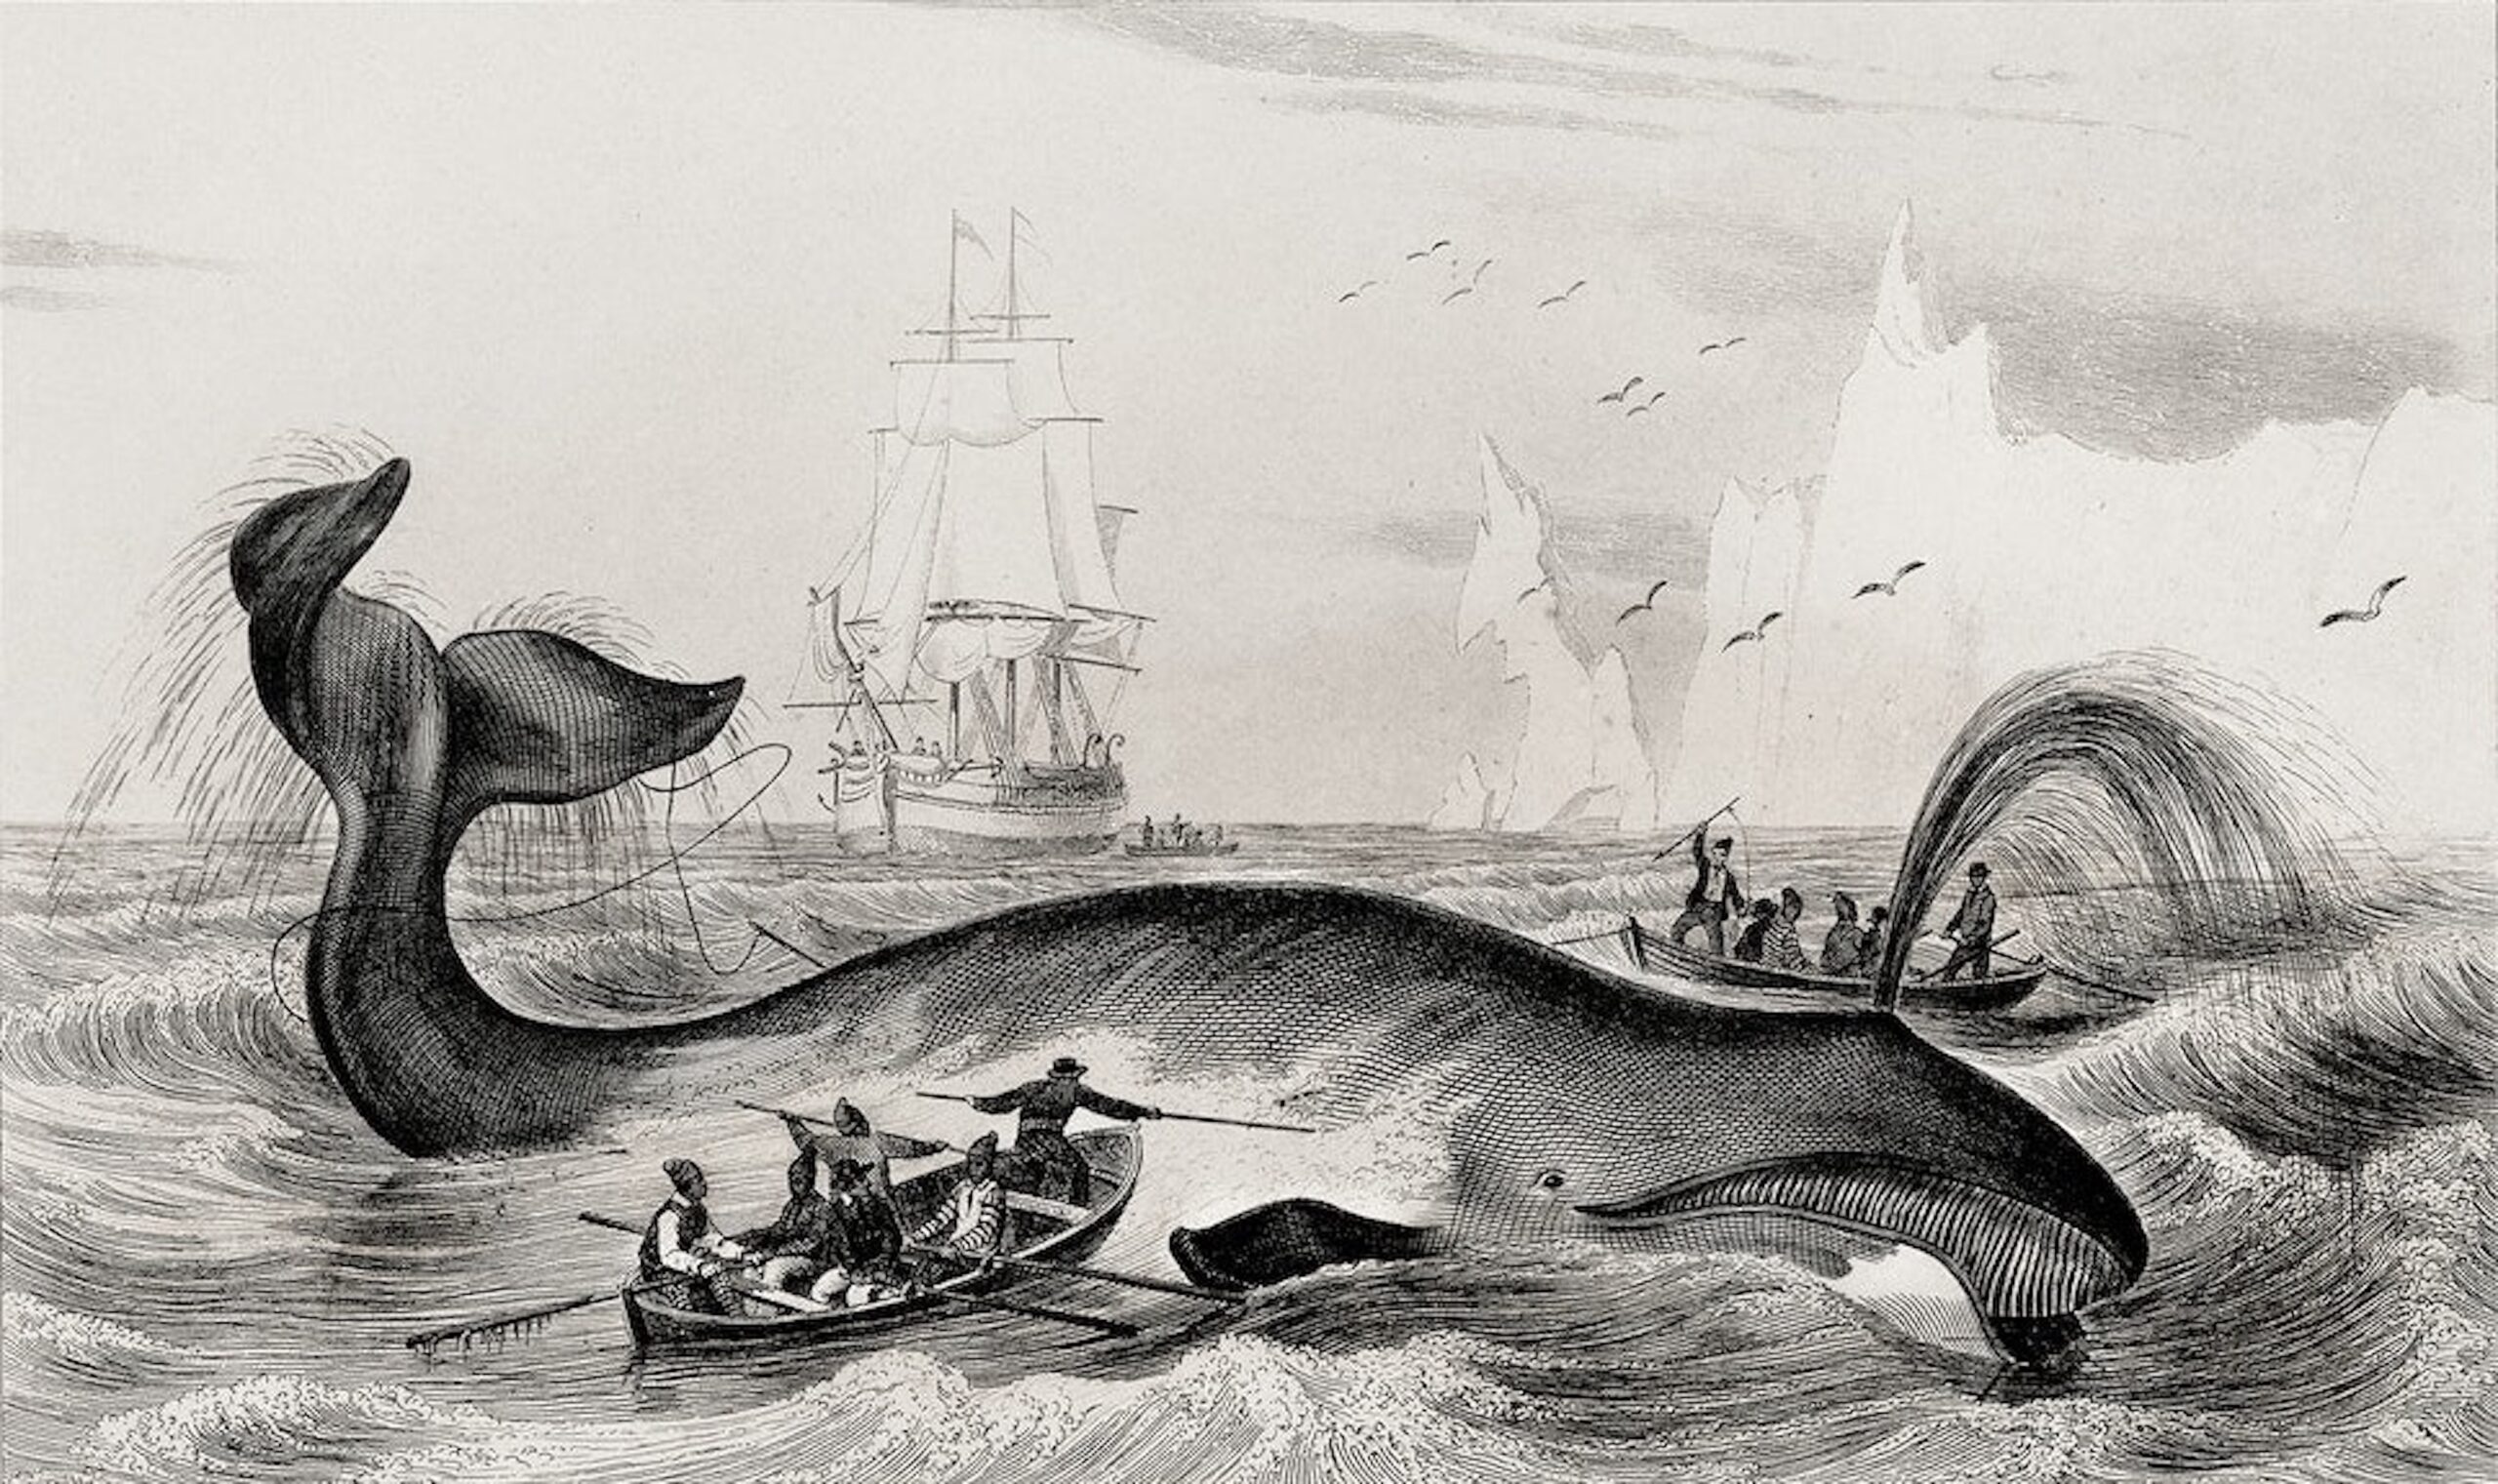 An old drawing of a whale being attacked by men on boats